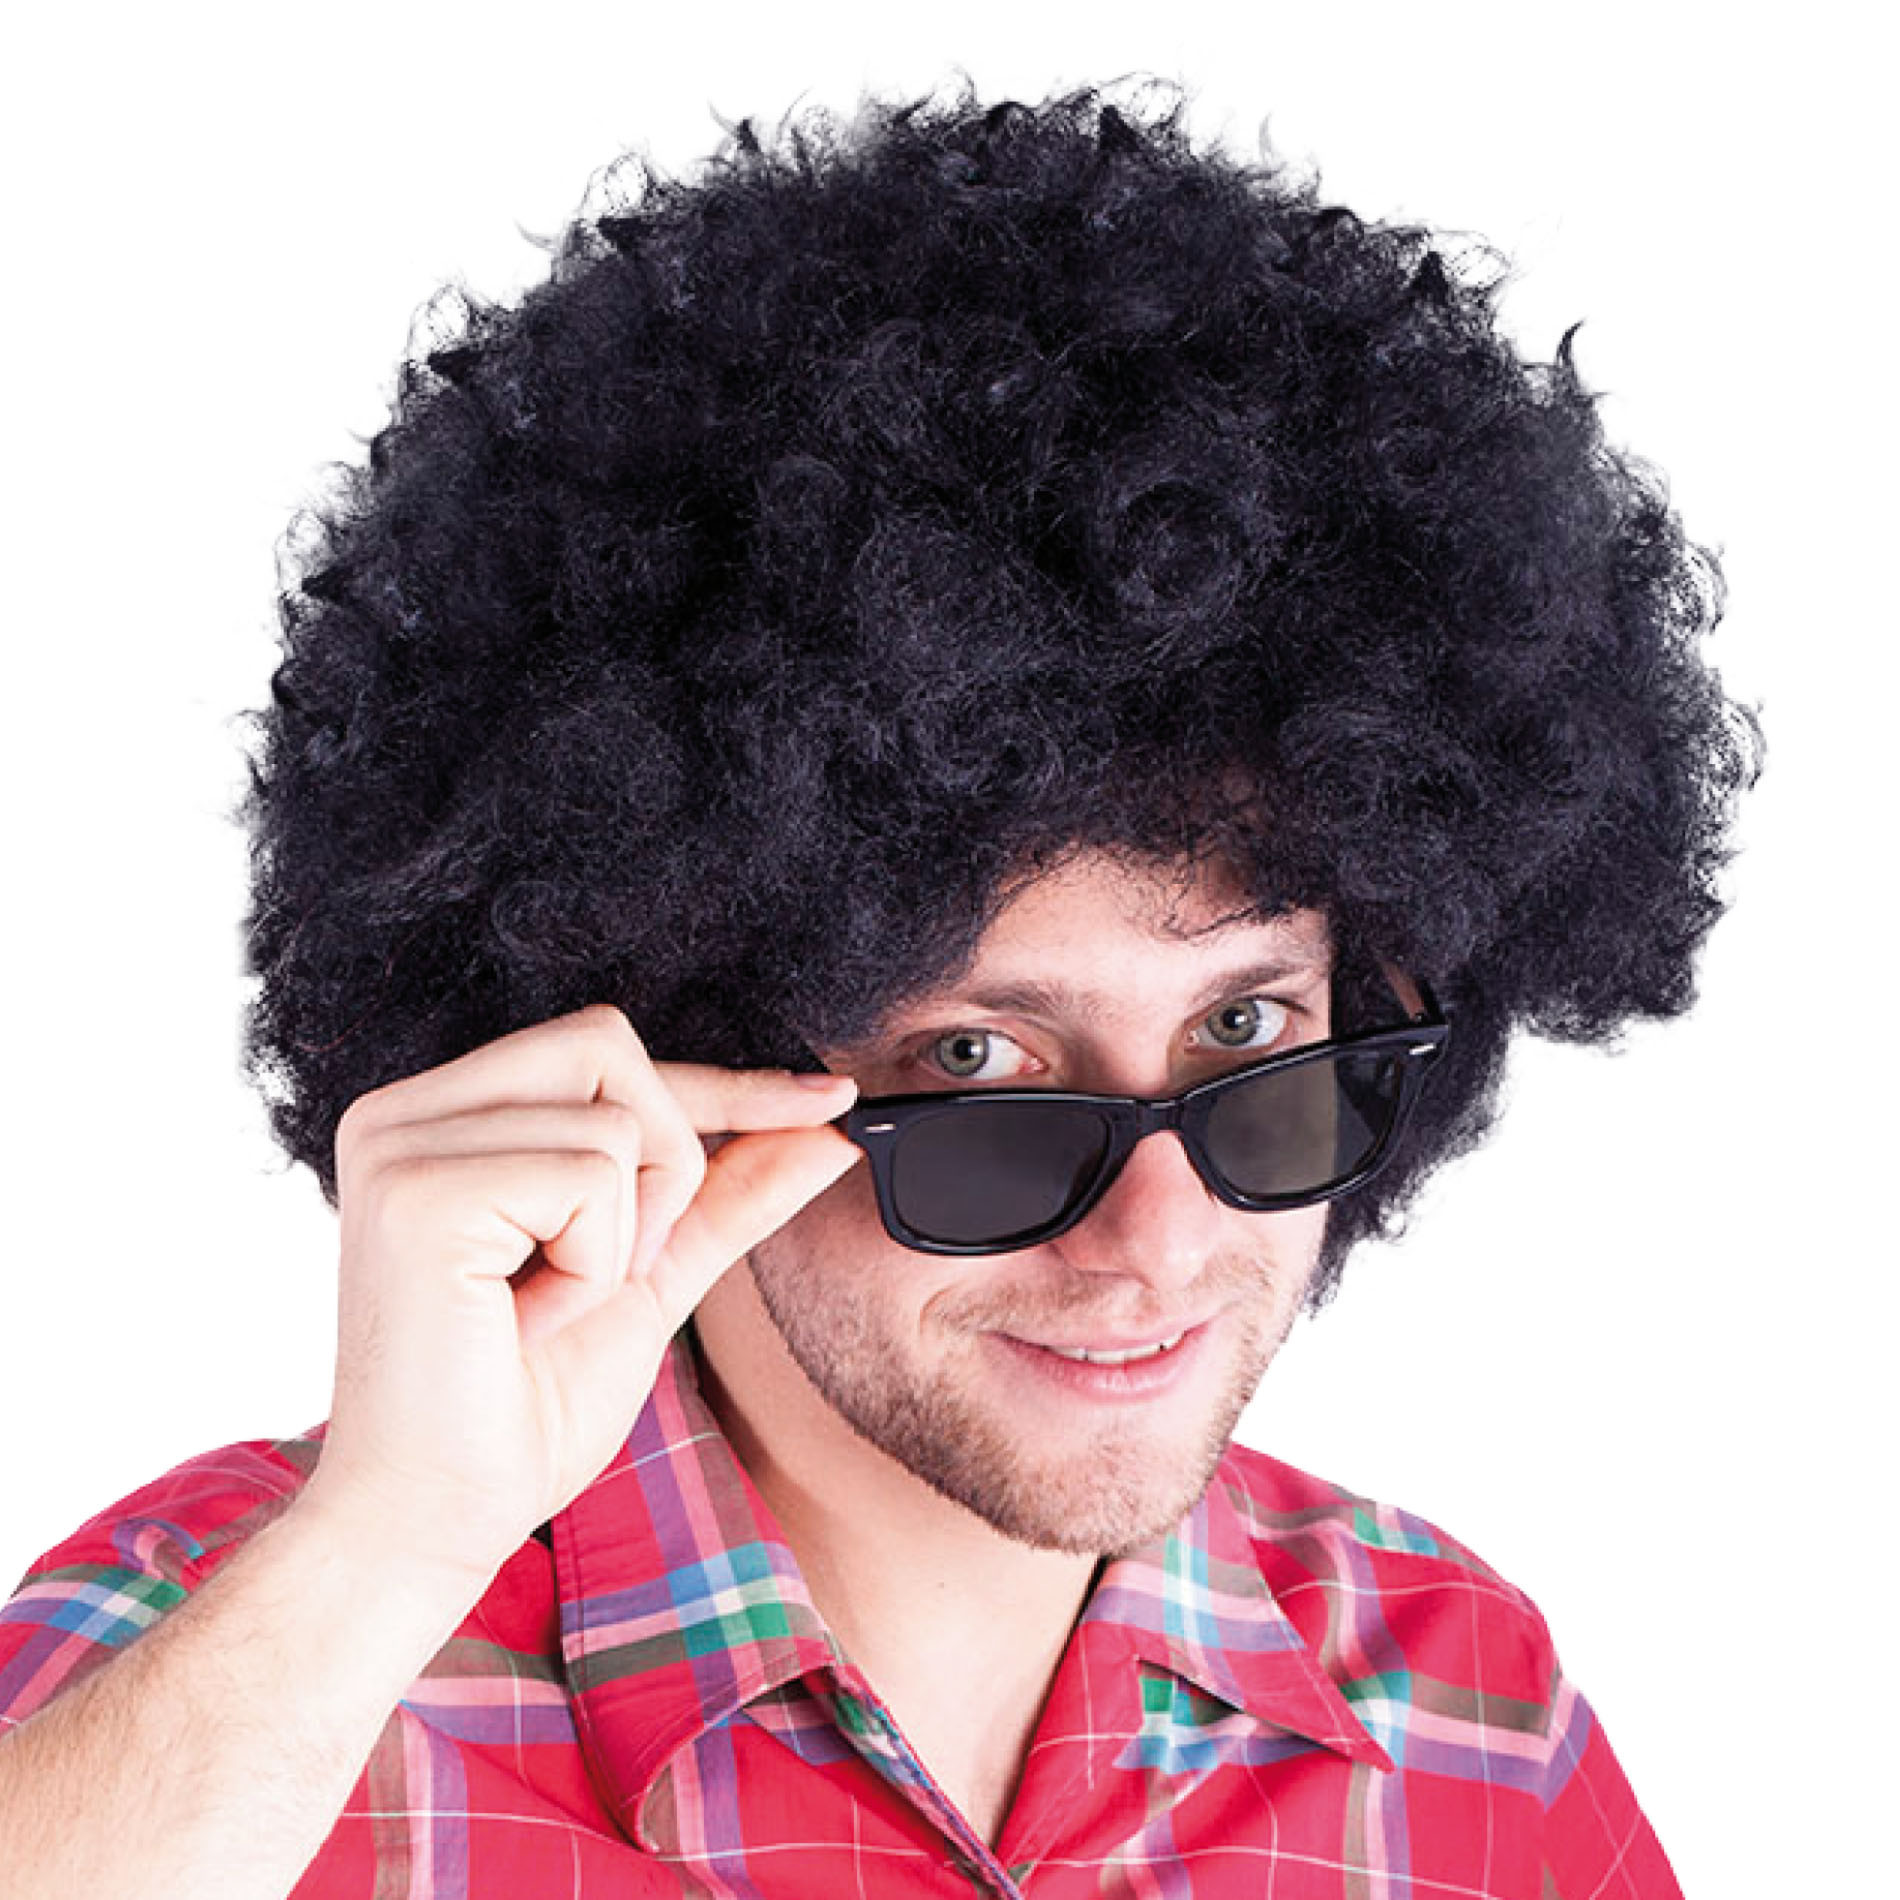 the afro hair wig for adult